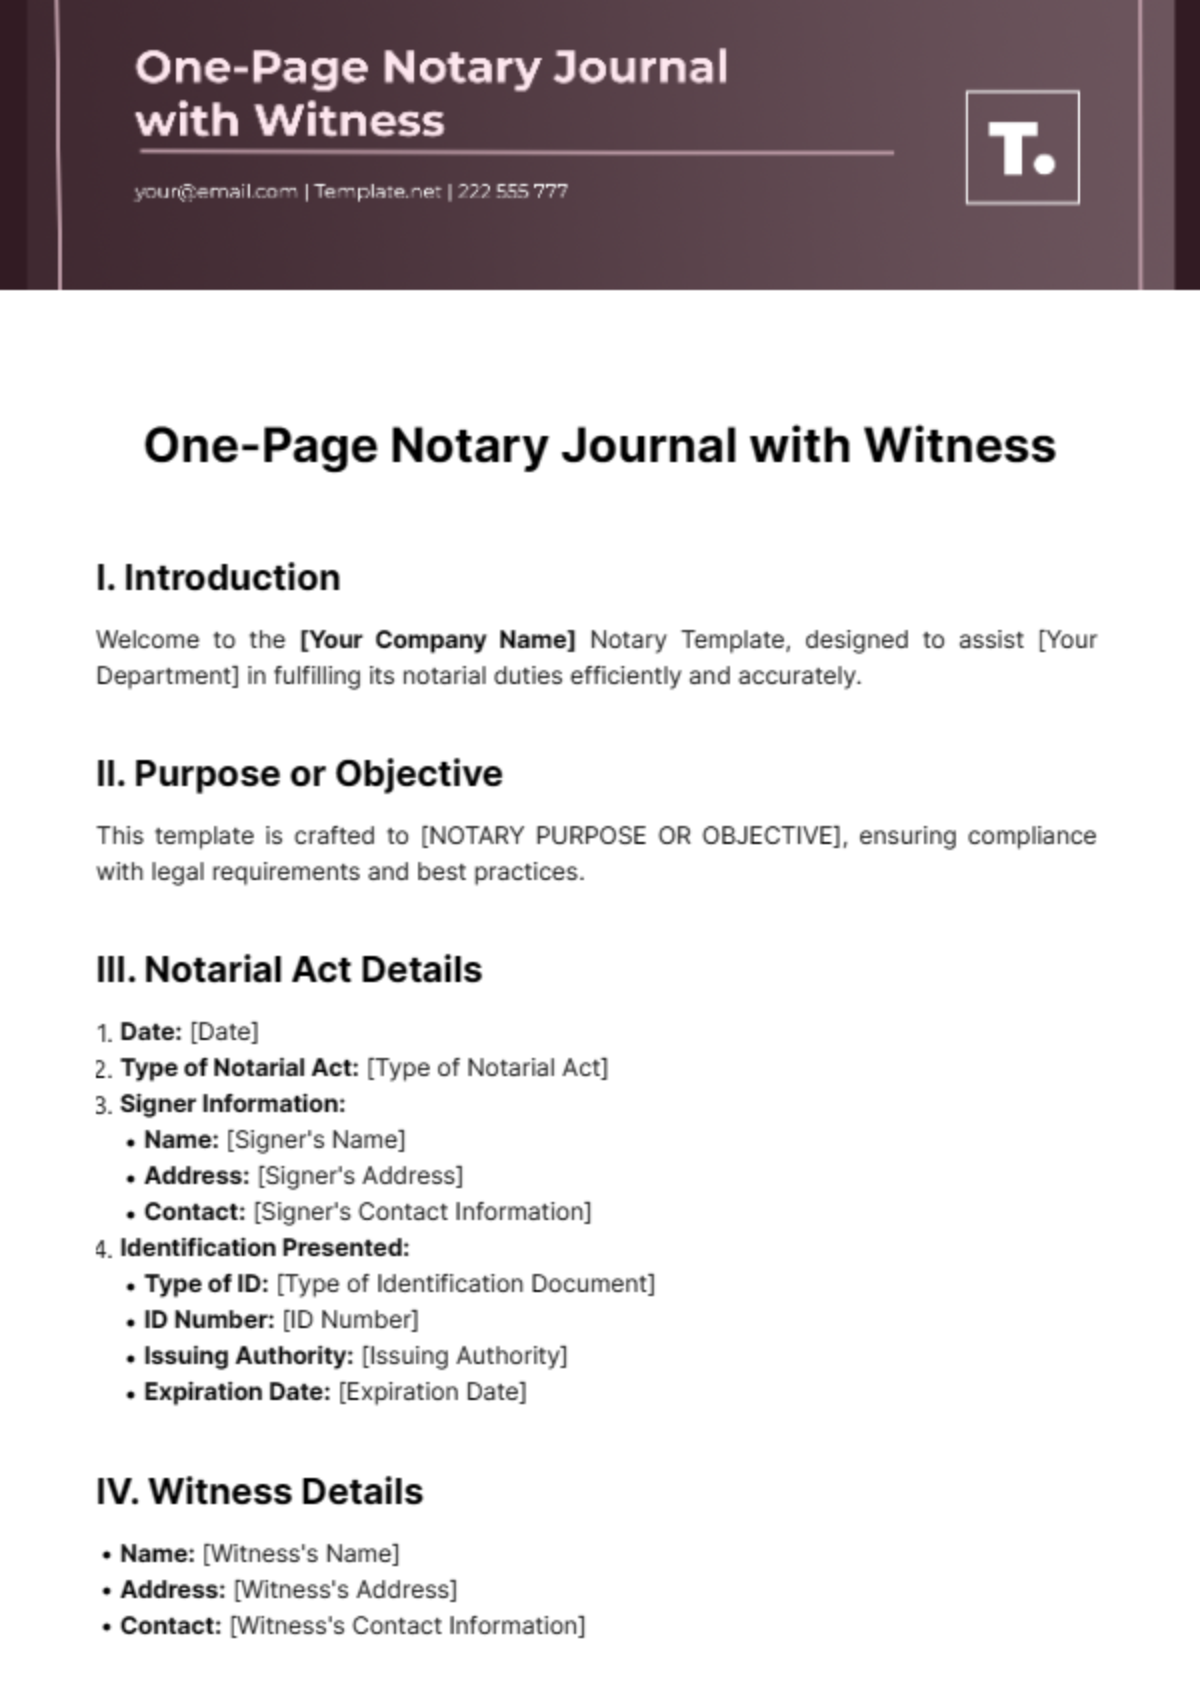 Free One-Page Notary Journal with Witness Template